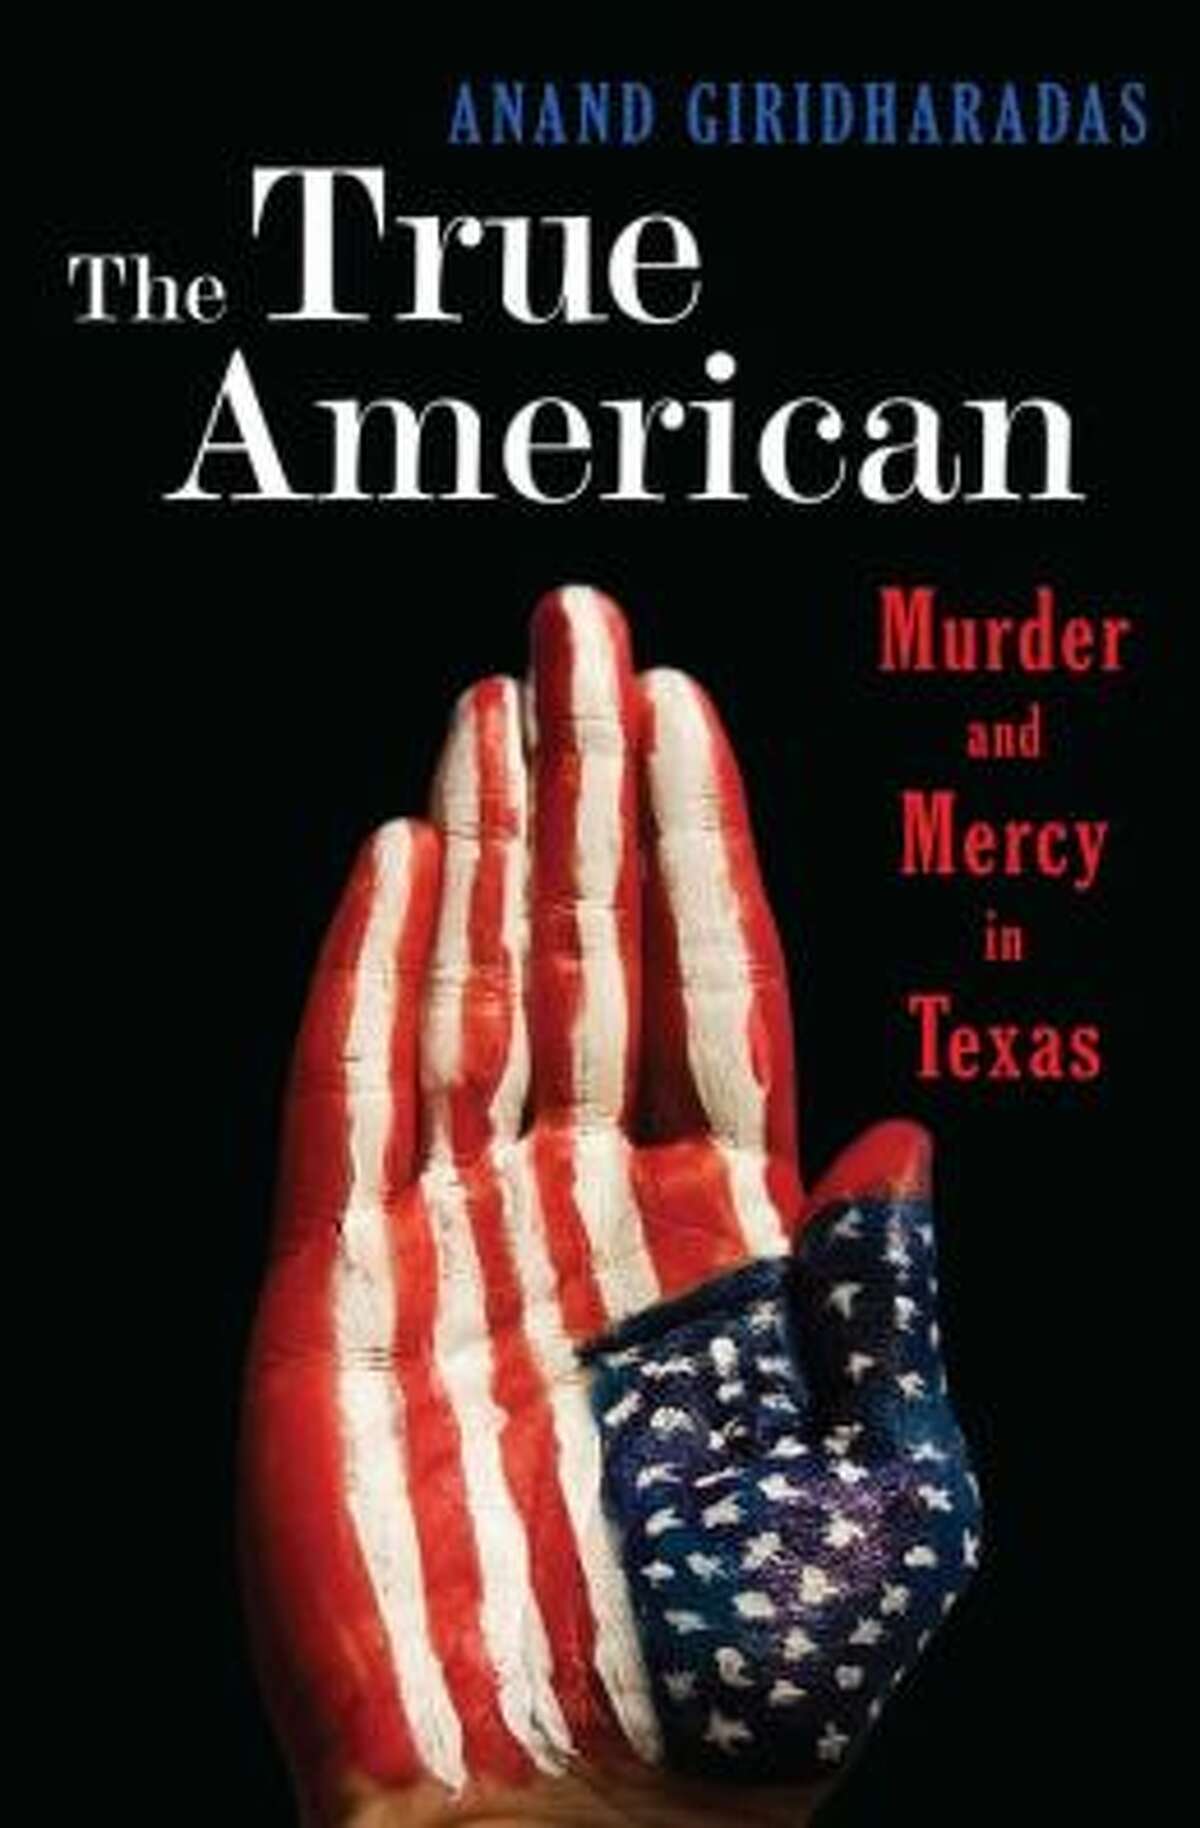 "The True American: Murder and Mercy in Texas" by Anand Giridharadas